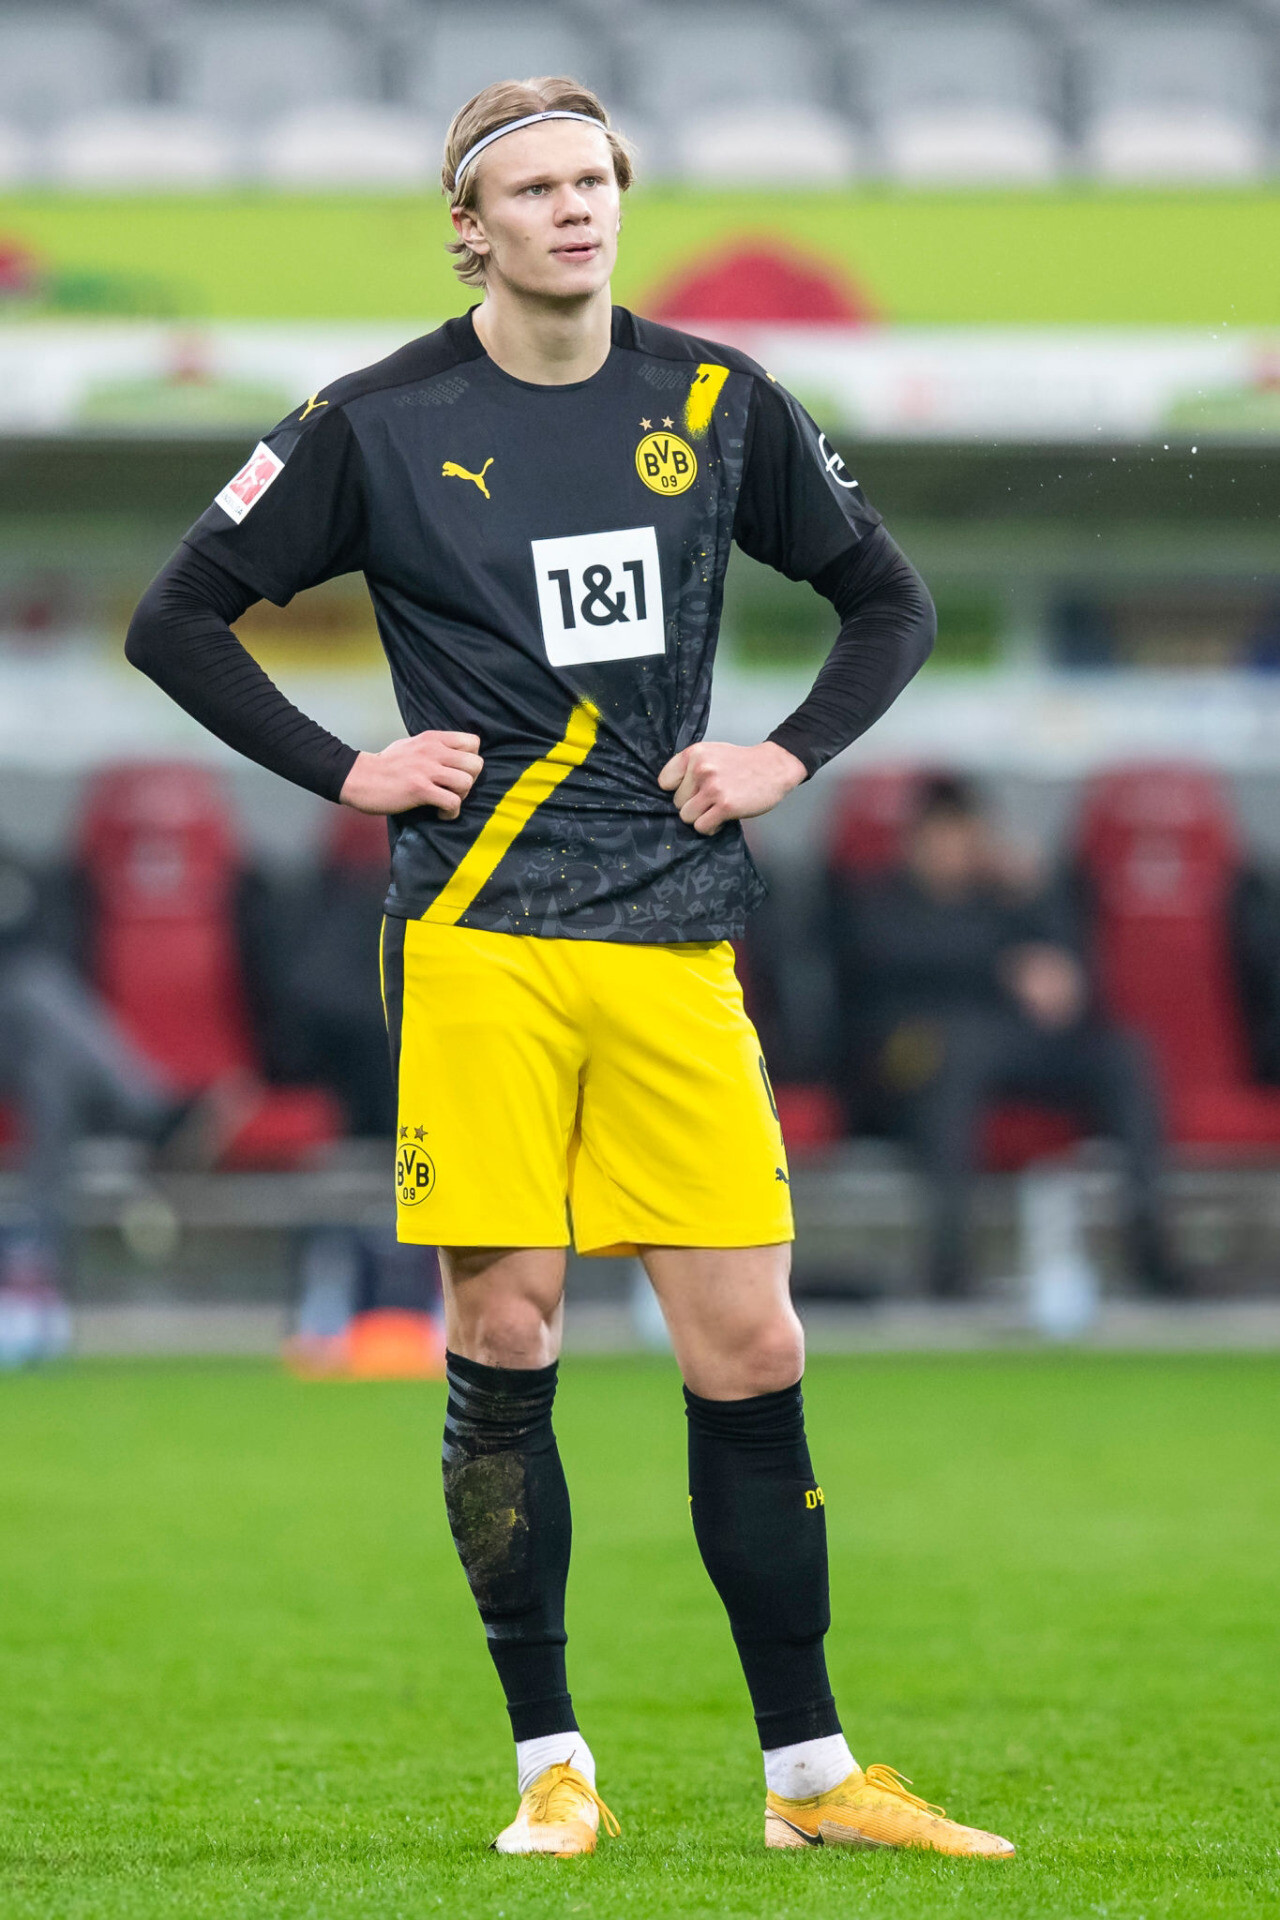 Erling Haaland: Moved to Manchester City in July 2022 from Borussia Dortmund. 1280x1920 HD Wallpaper.